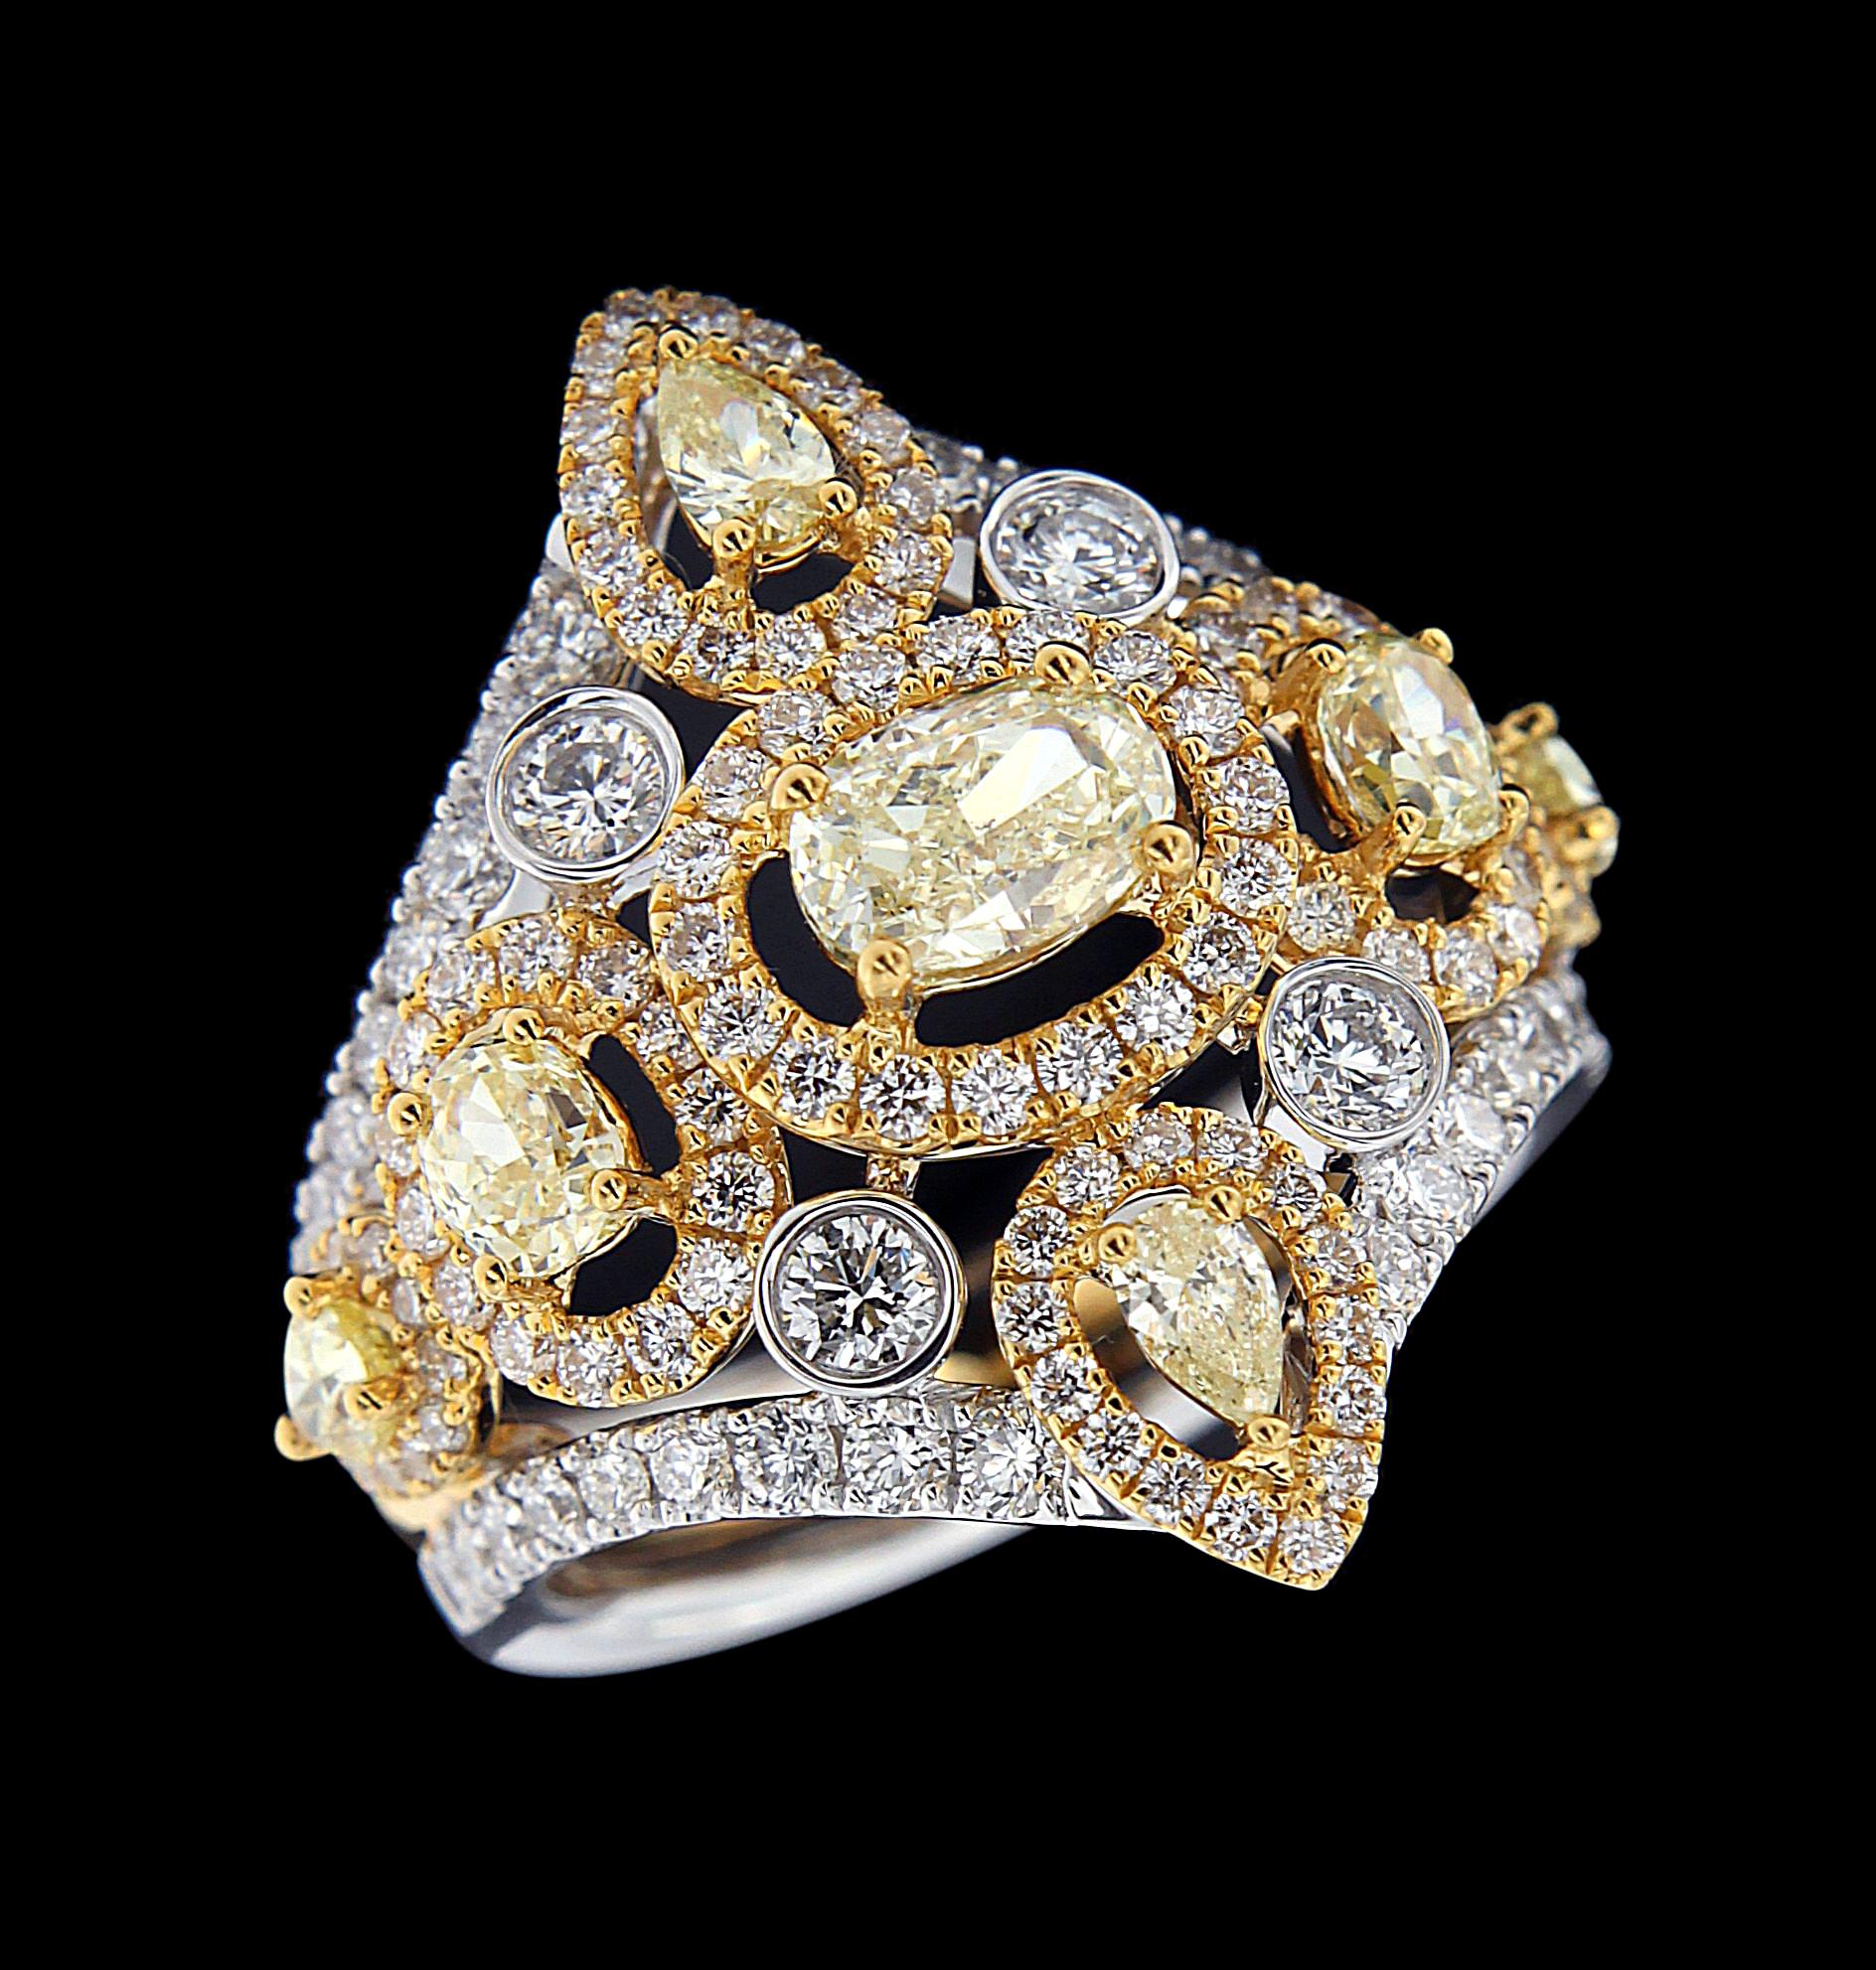 Ring 
Diamonds weighing approximately around 3.478 carats , mounted on 18 karat yellow gold . The ring weighs around 10.264 grams approximately. 

Please note: The prices listed do not include any shipment, TAX, VAT, DUTY, IMPORT, EXPORT